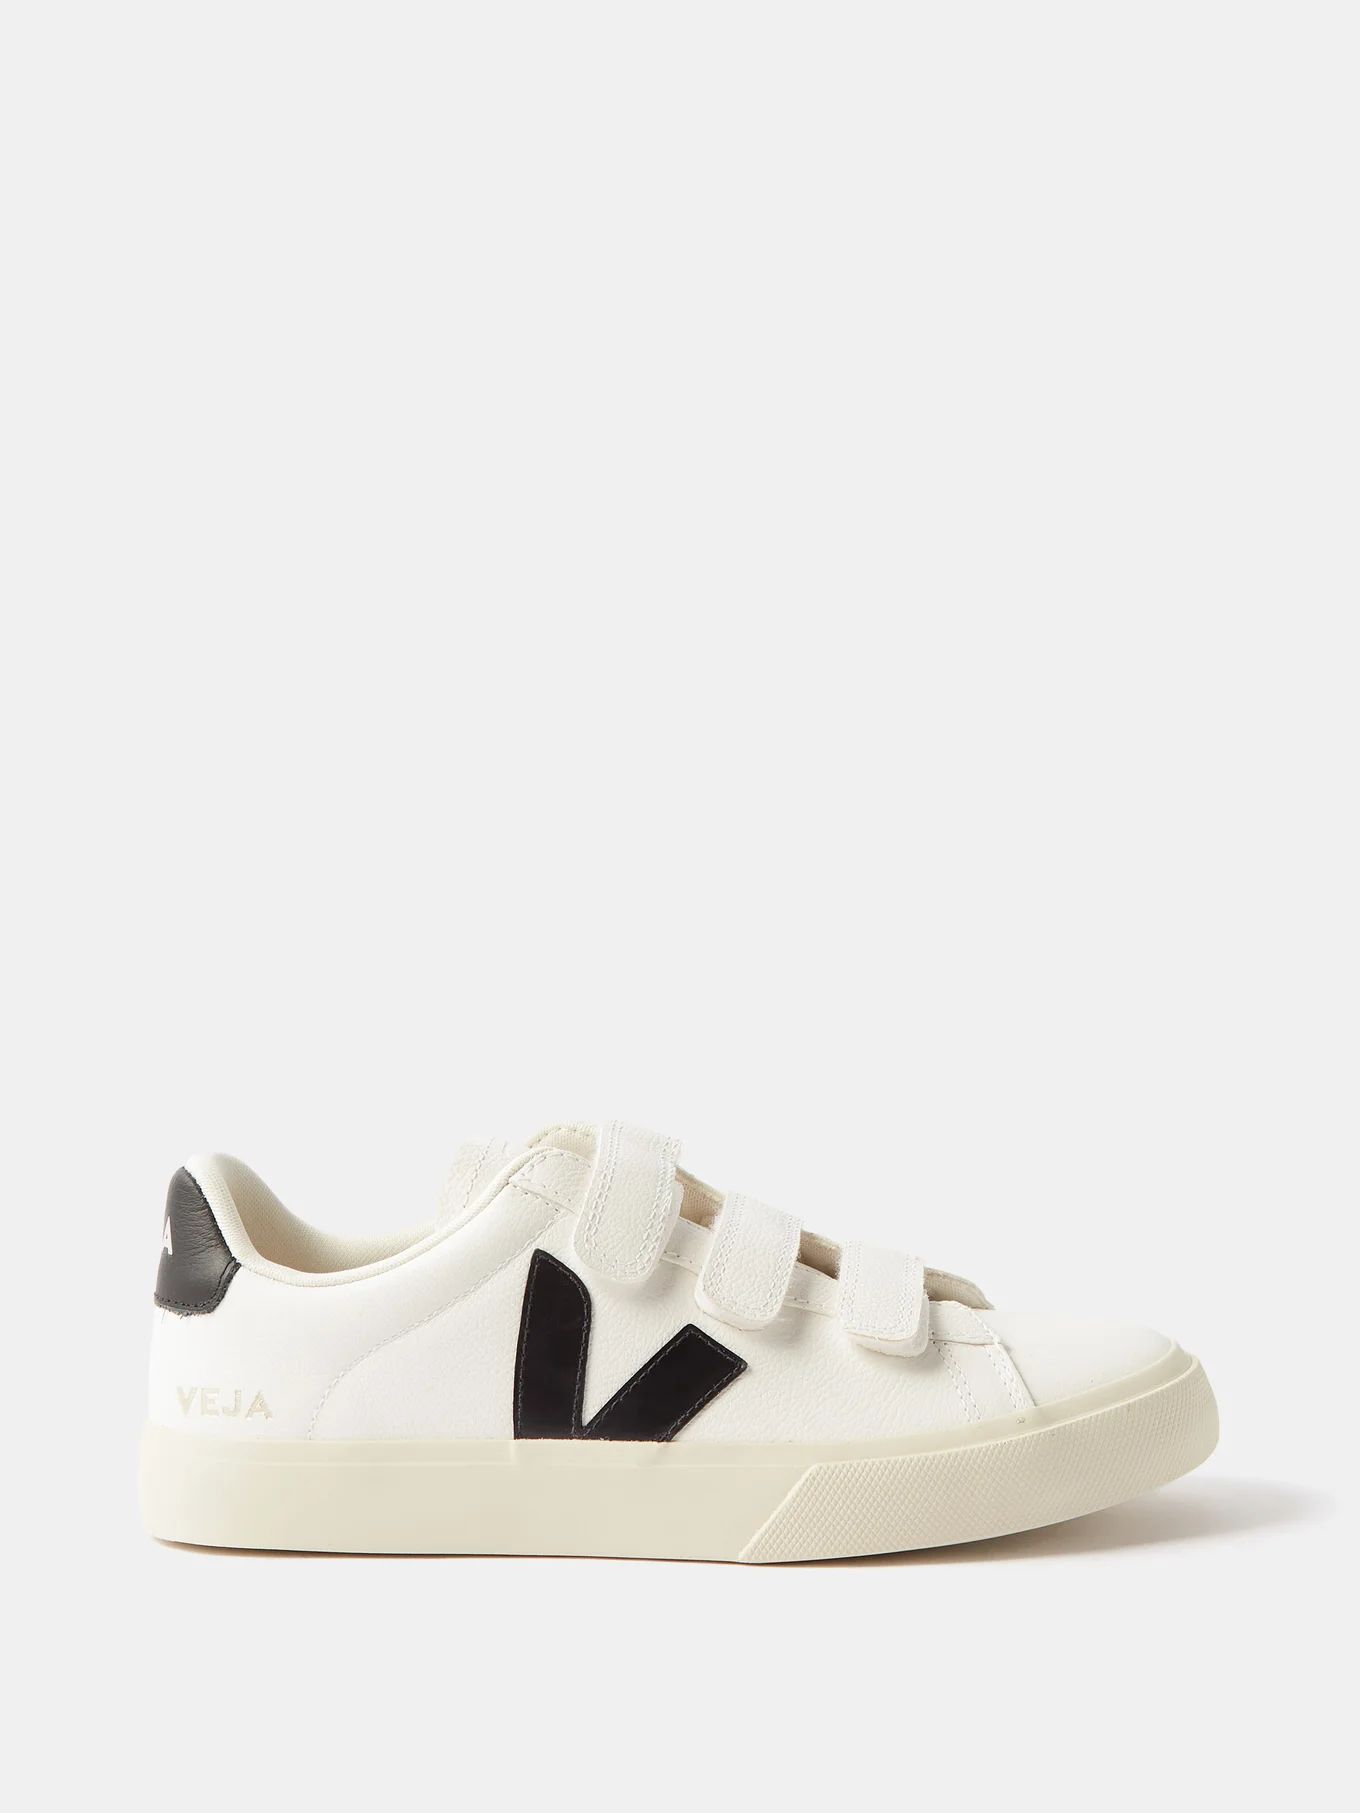 Recife velcro leather trainers | Veja | Matches (US)